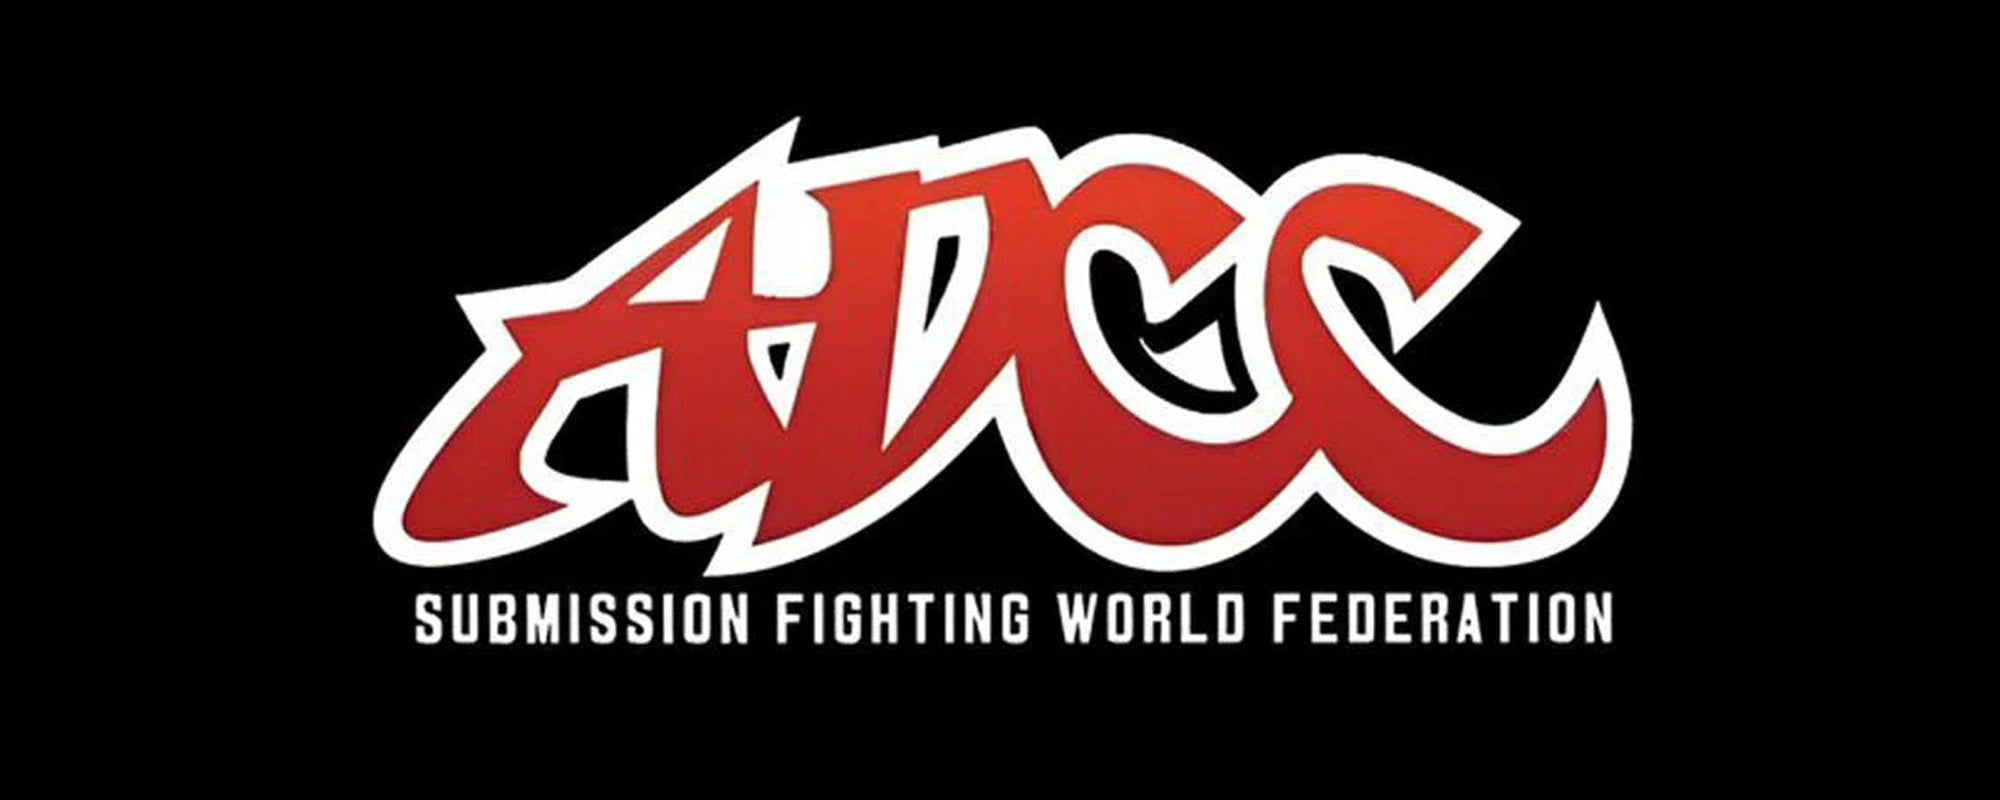 ADCC Announces Policy On Transgender Athletes In Competition